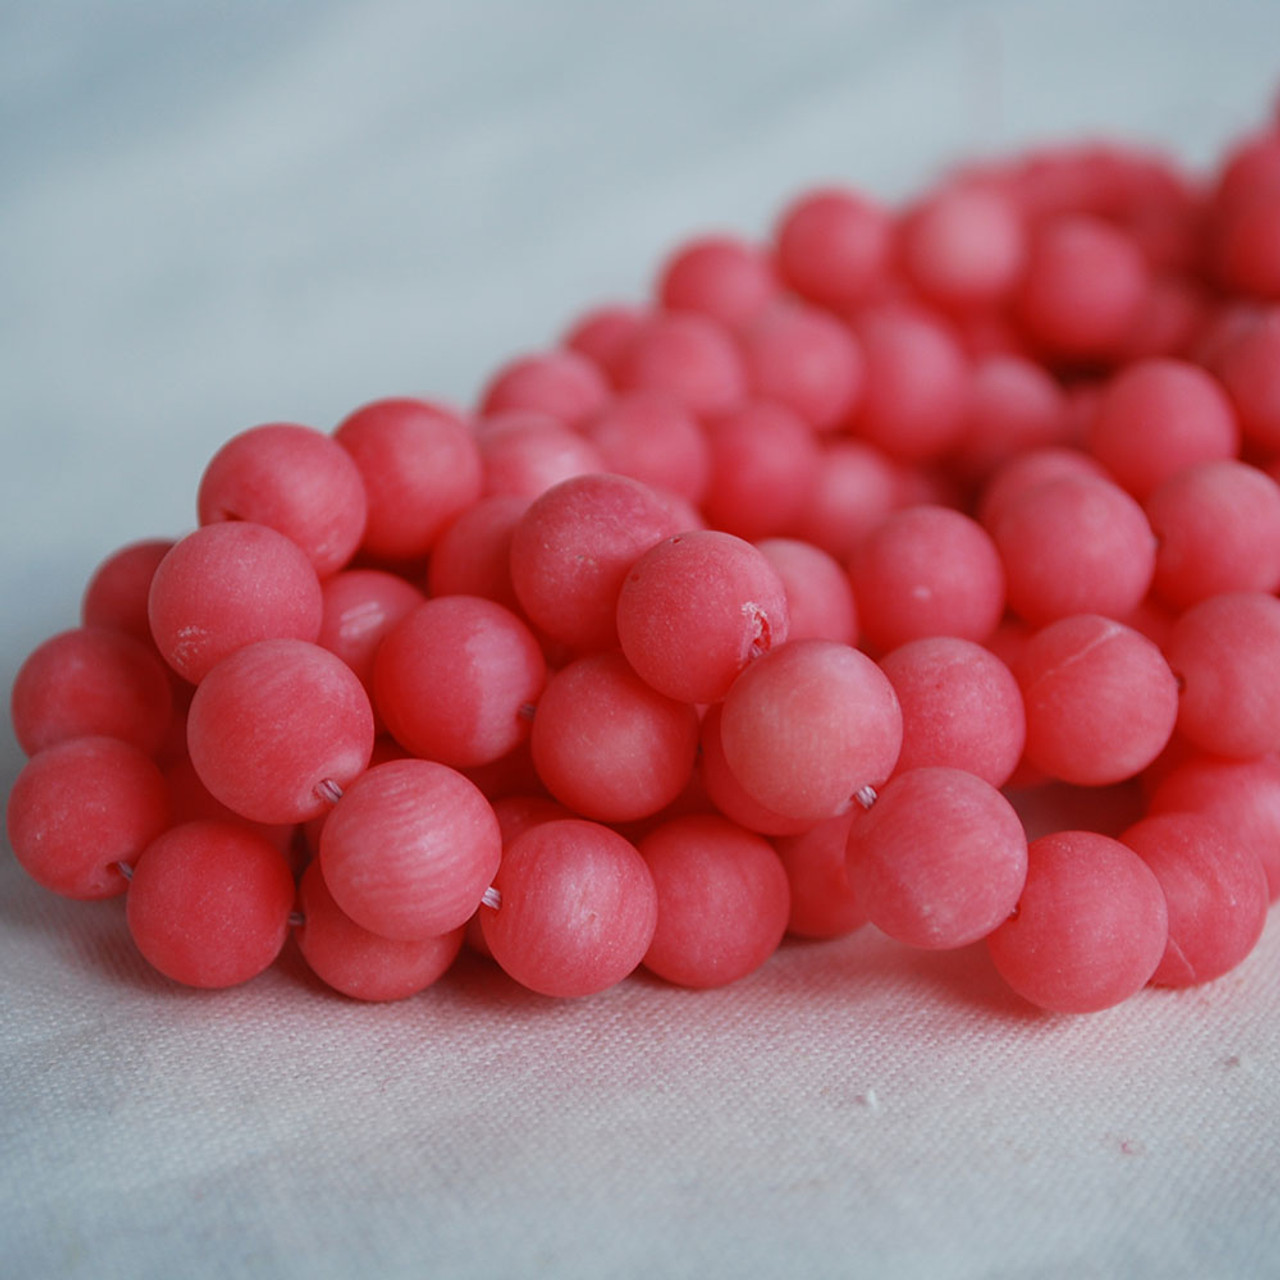 High Quality Grade A Pink Coral (dyed from natural coral) Frosted / Matte  Semi-precious Gemstone Round Beads 4mm, 6mm, 8mm, 10mm sizes 